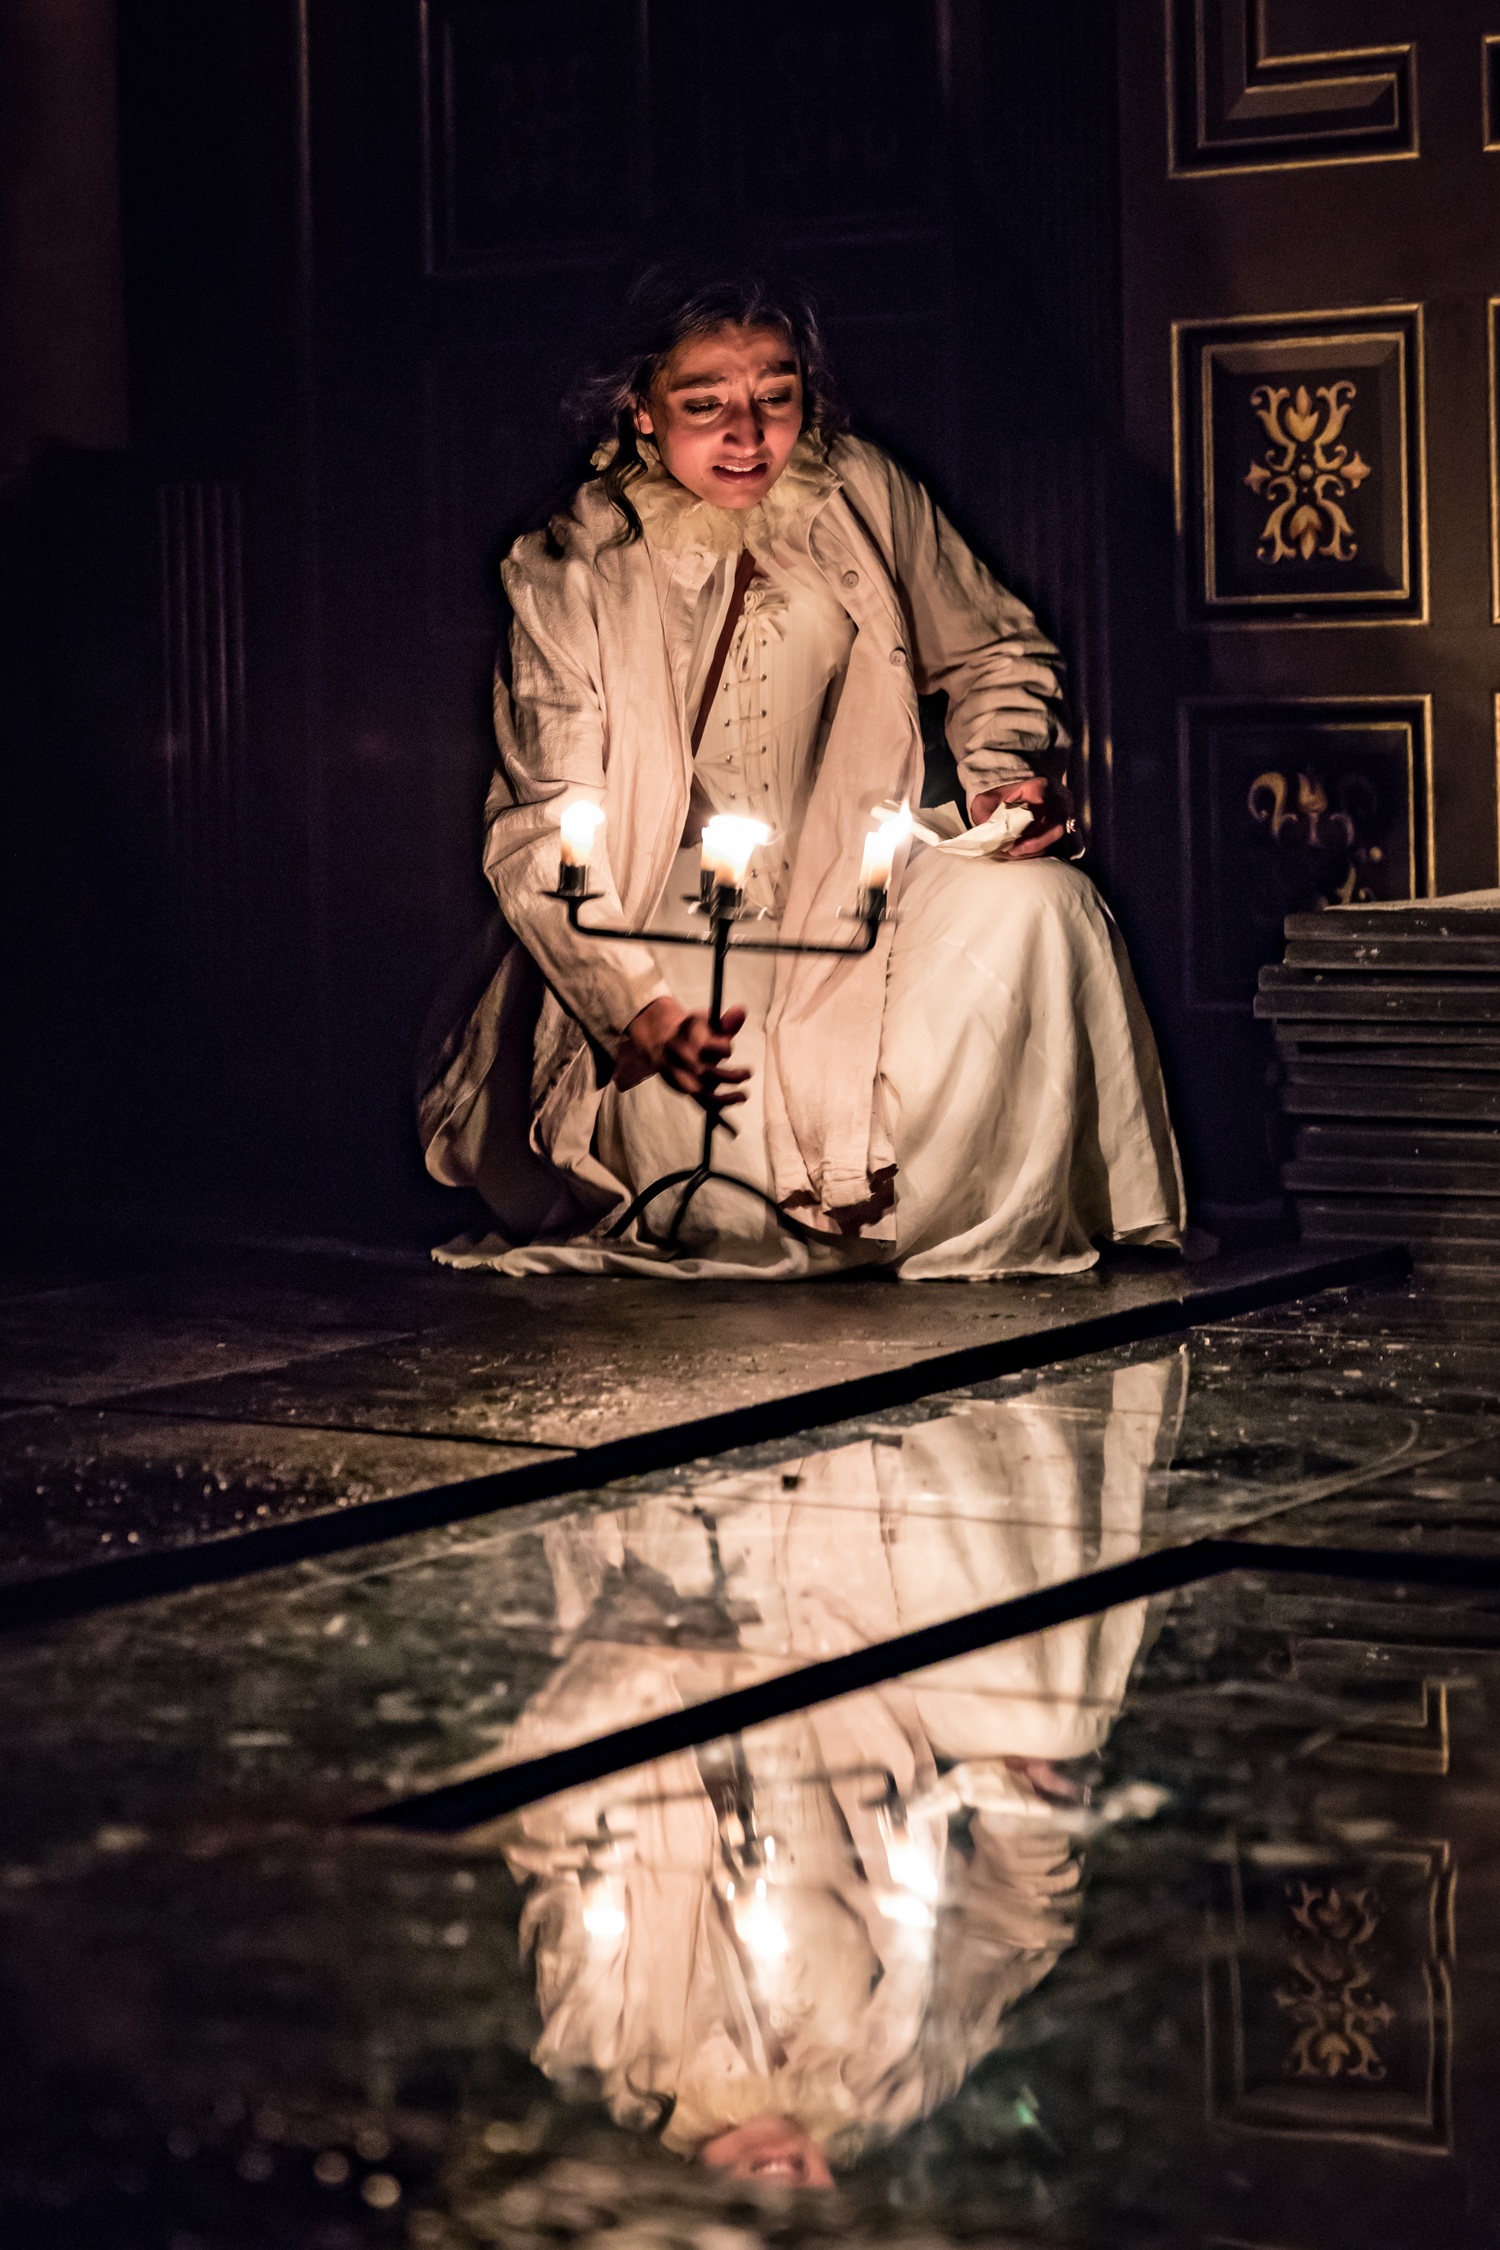 BWW Review: ALL'S WELL THAT ENDS WELL, Sam Wanamaker Playhouse 